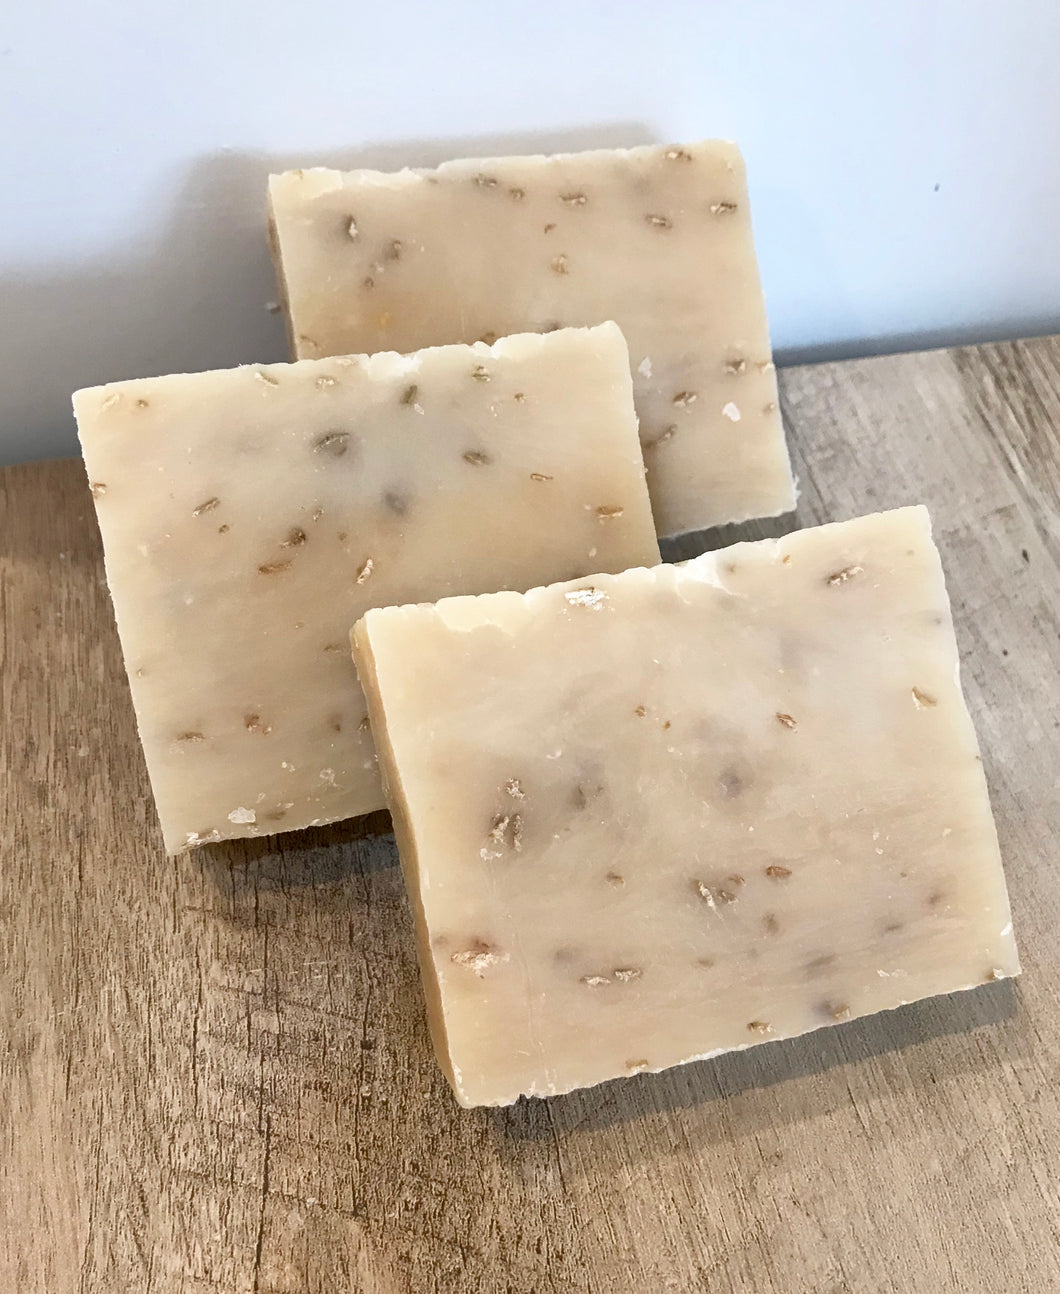 Unscented Oatmeal Soap Bar With Goat's Milk